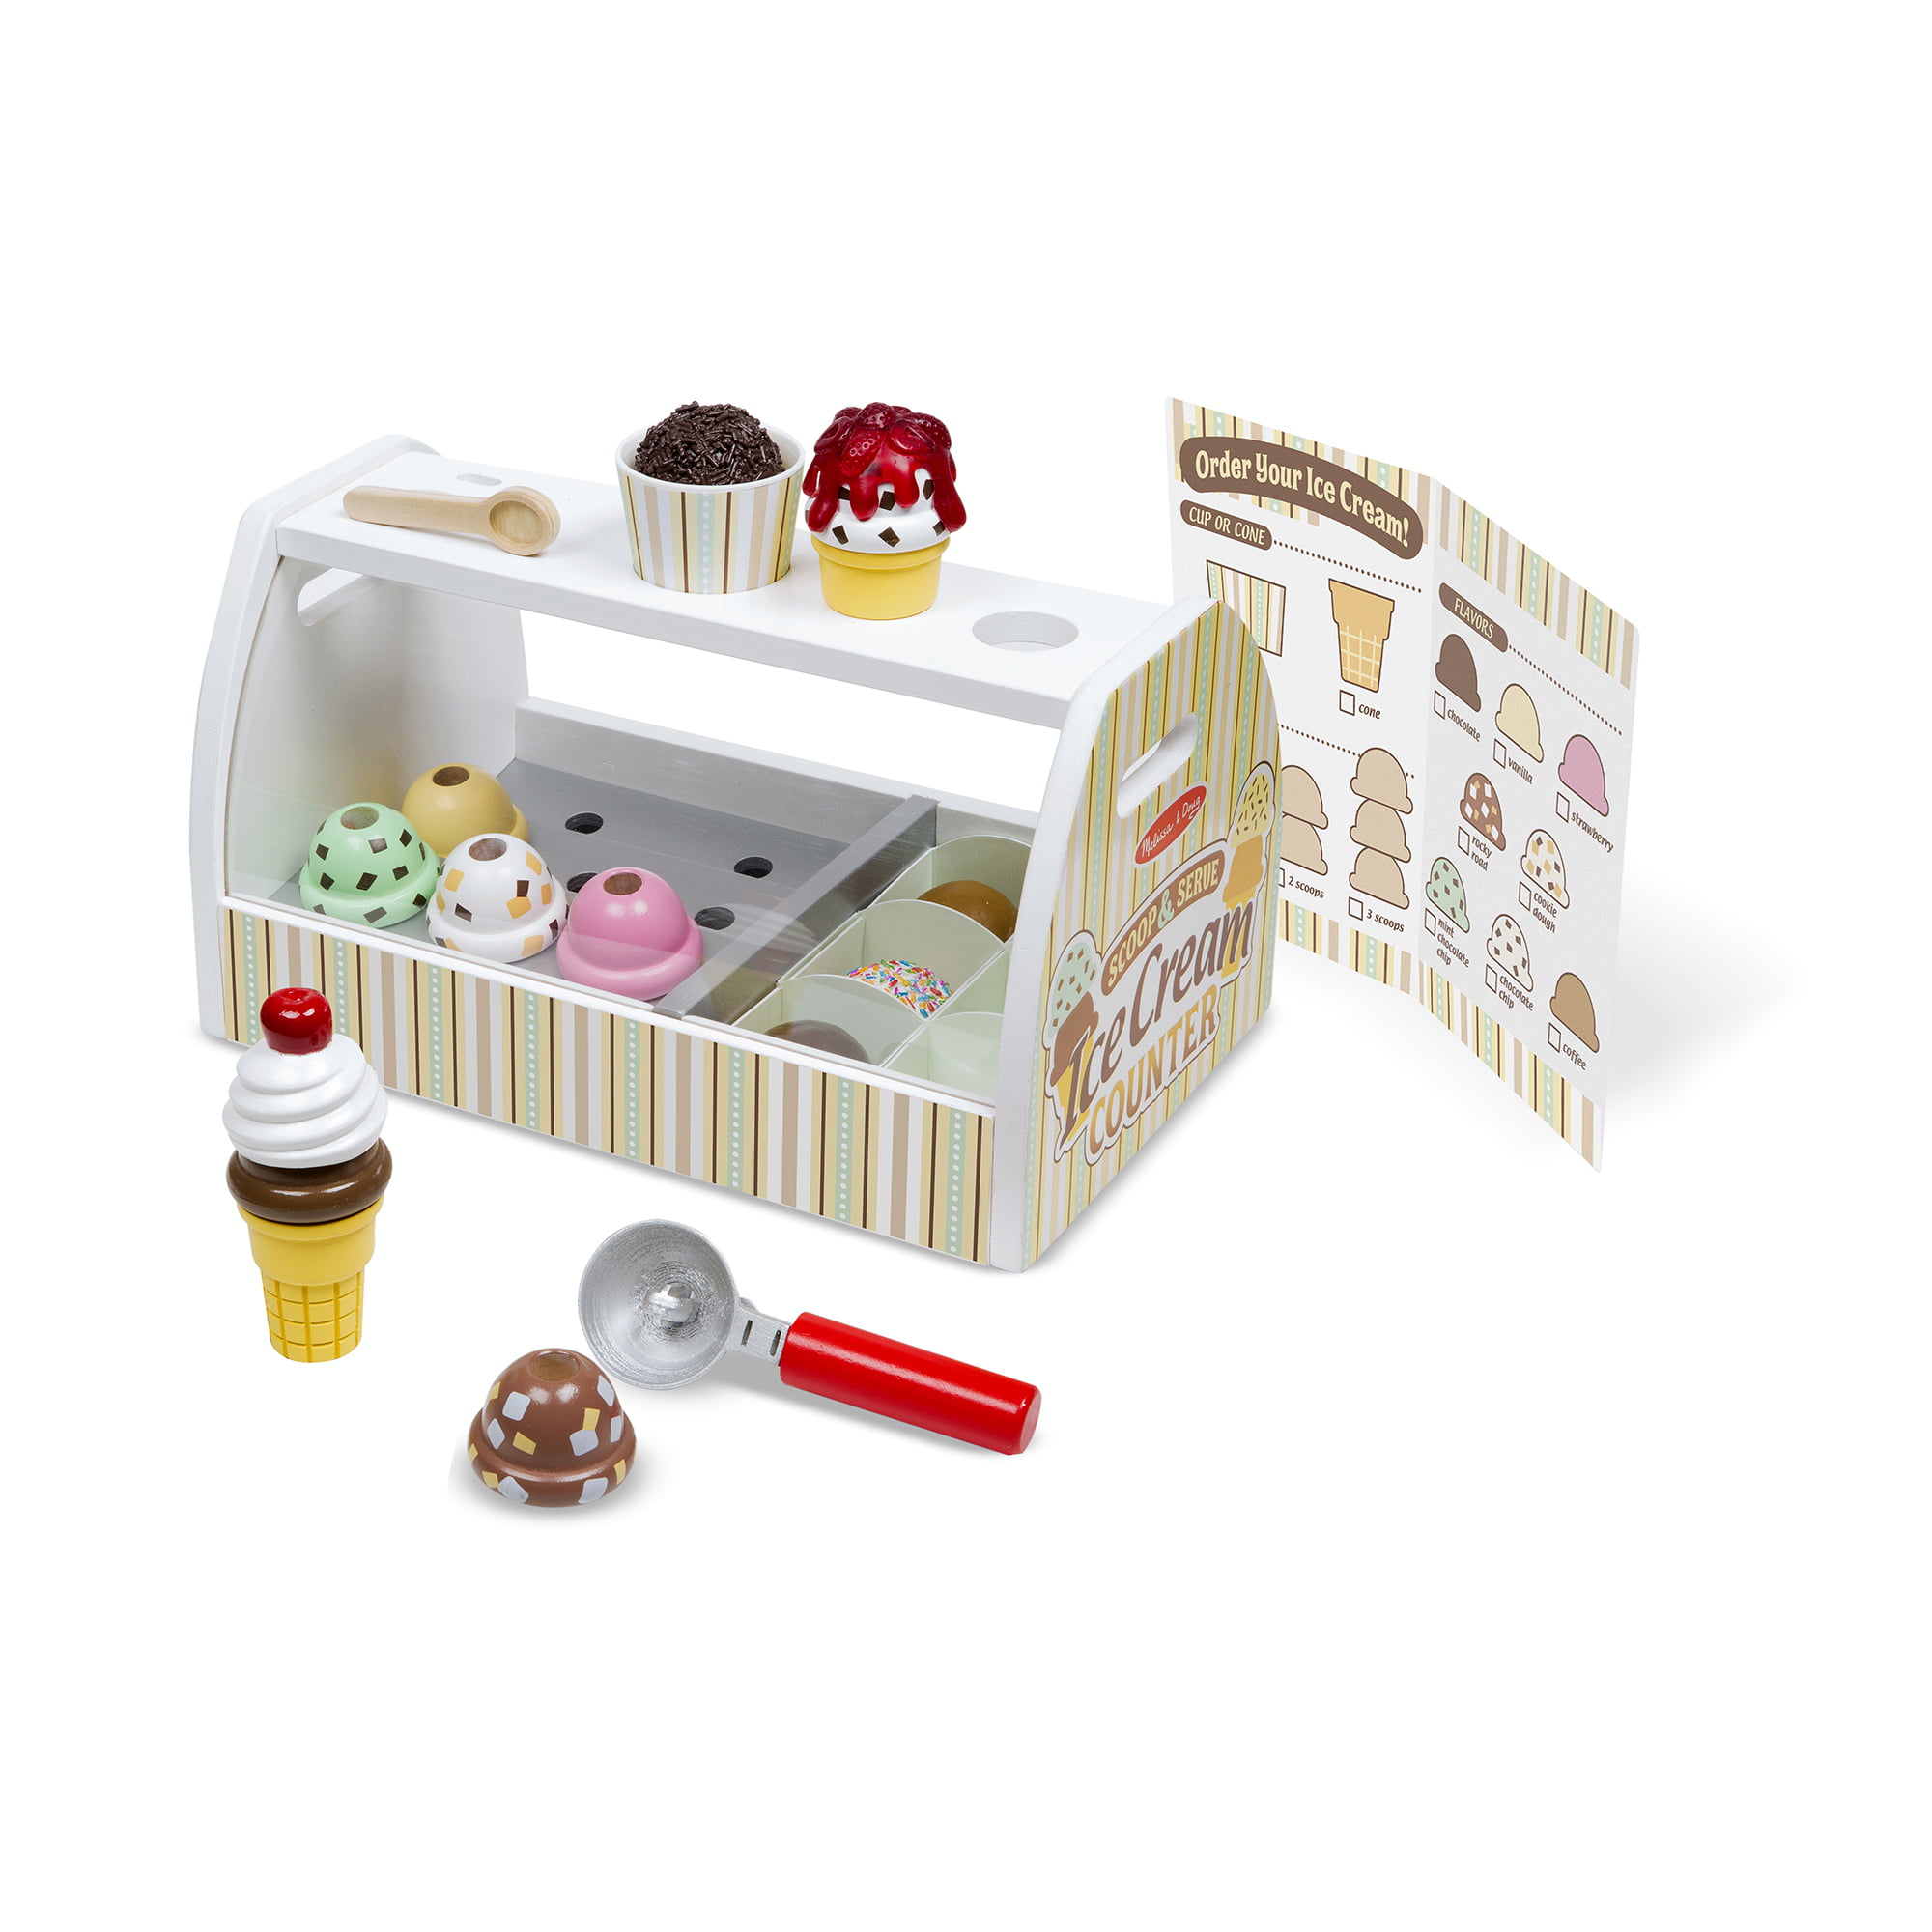 Melissa Doug Wooden Scoop Serve Ice Cream Counter Play Food and Accessories, 28 